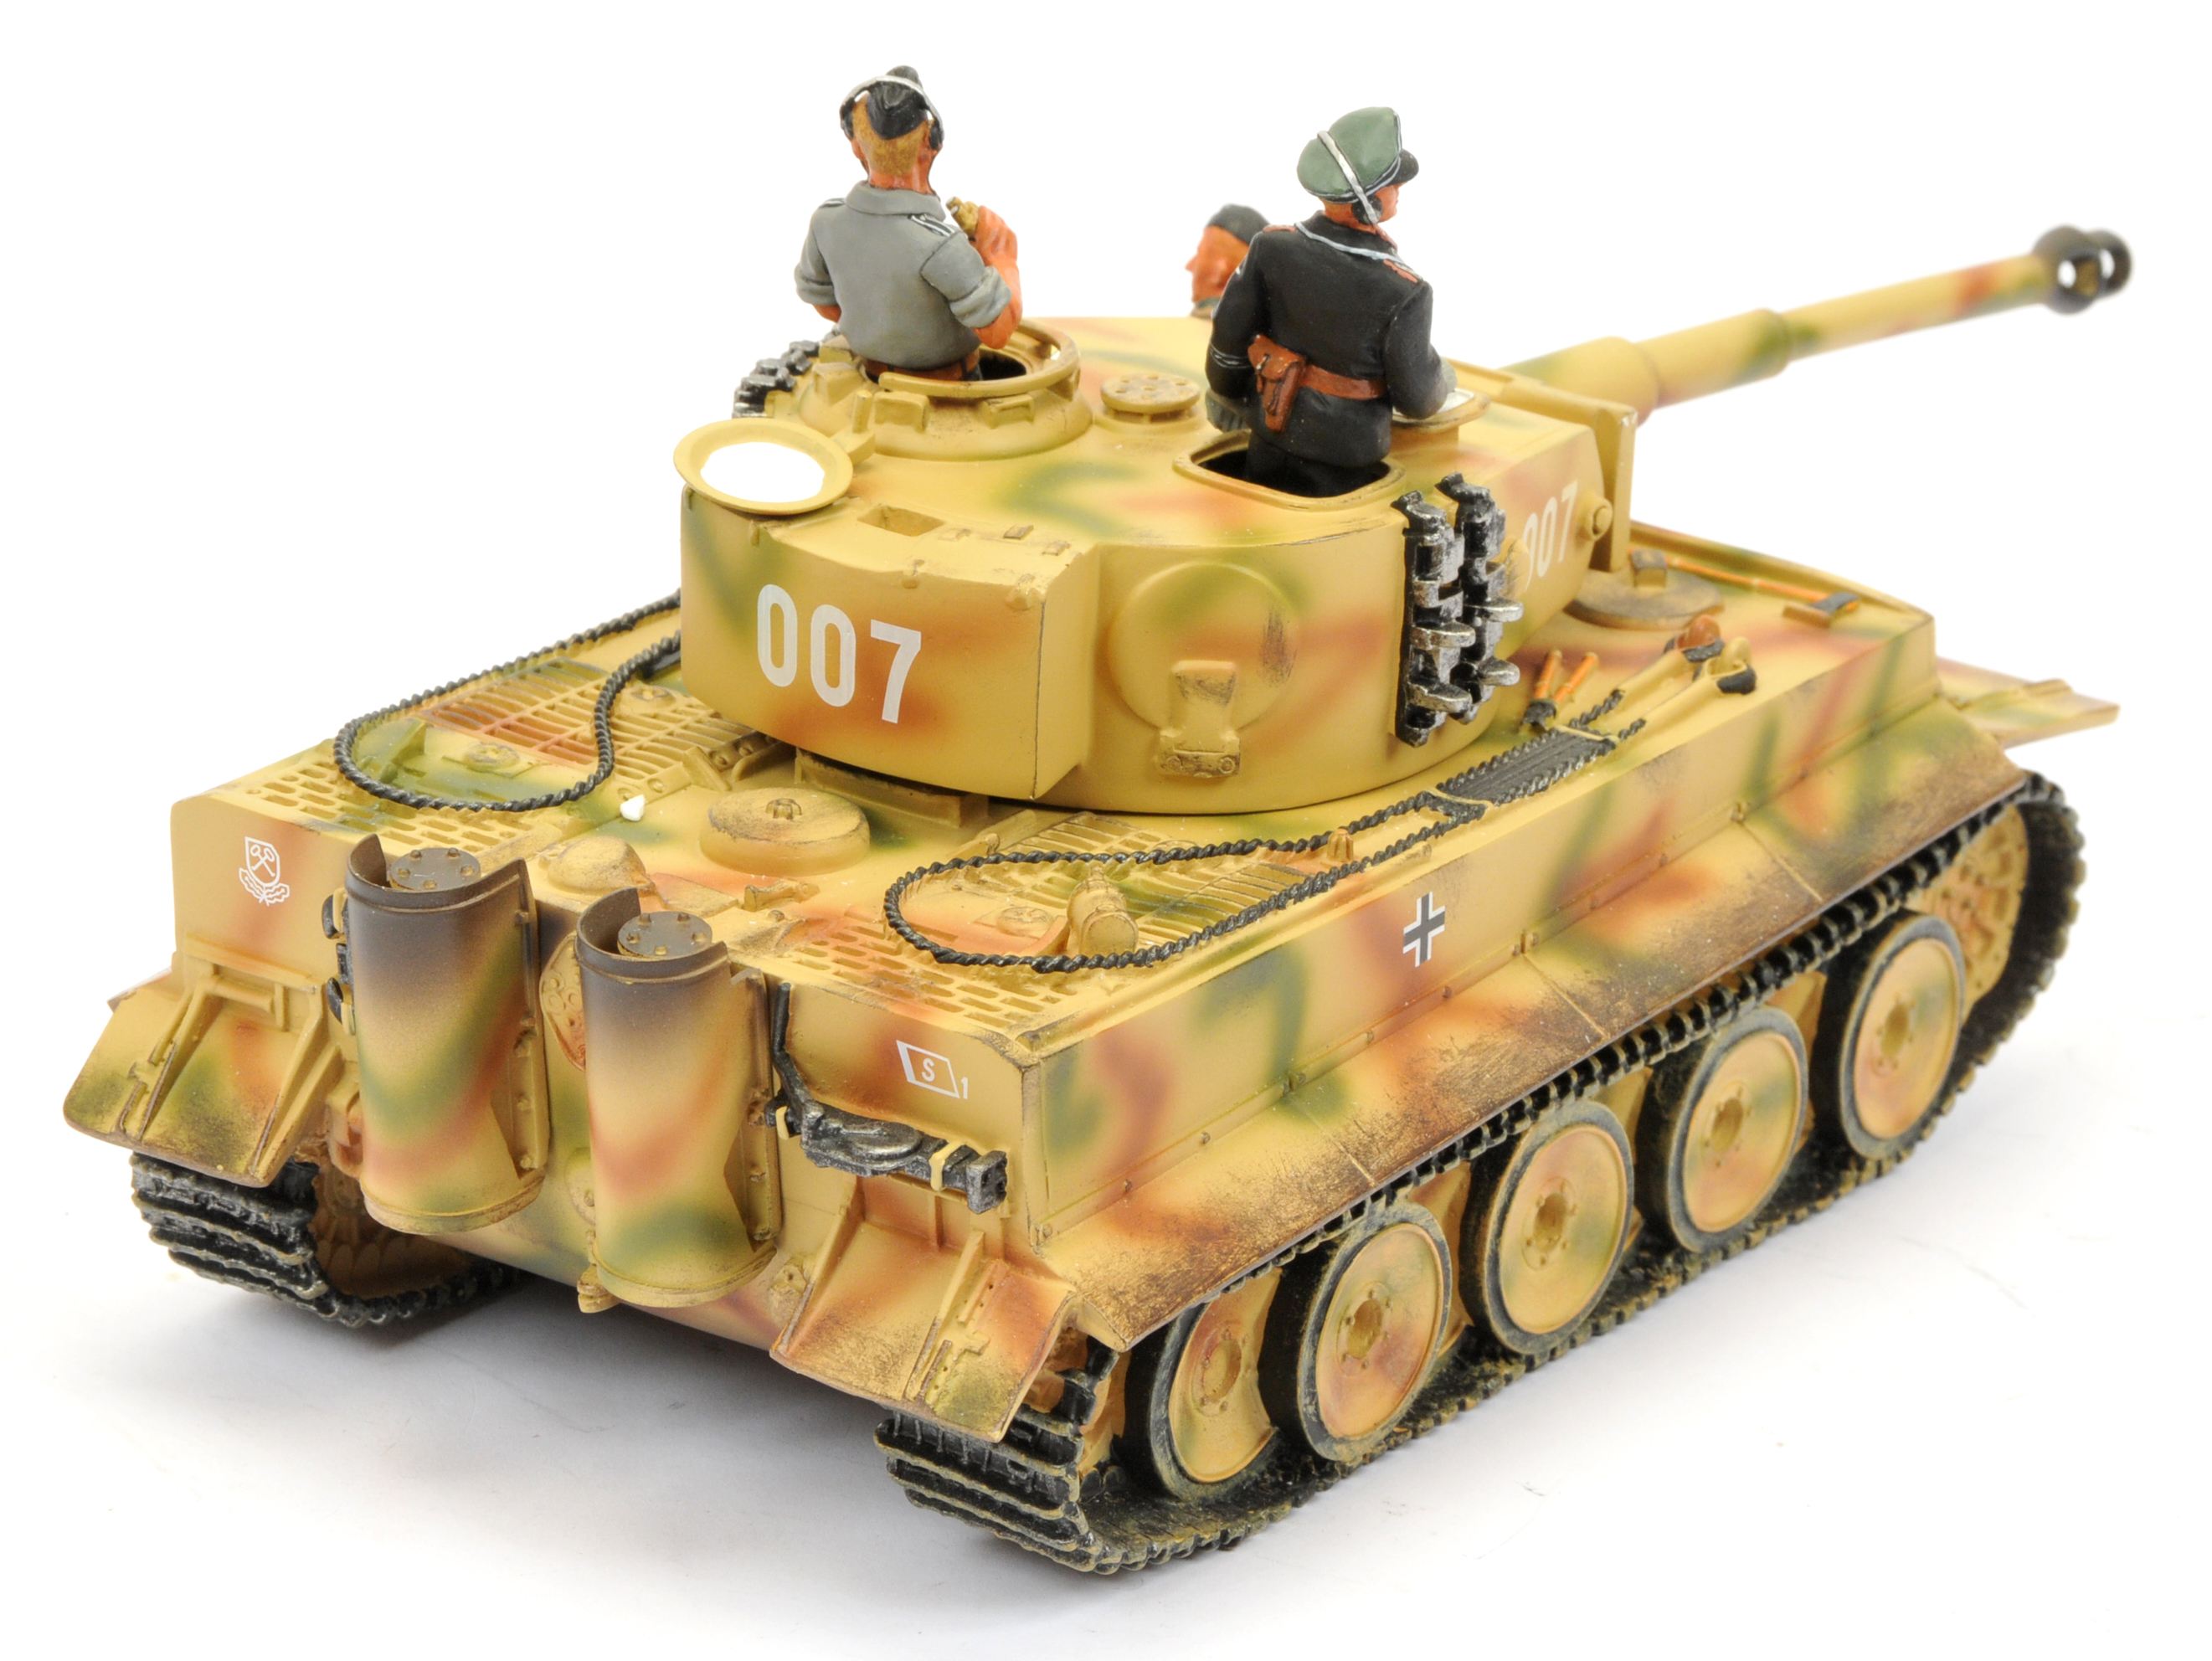 King & Country - Waffen SS: Tiger Tank 007 Set WSS043 - Image 2 of 2